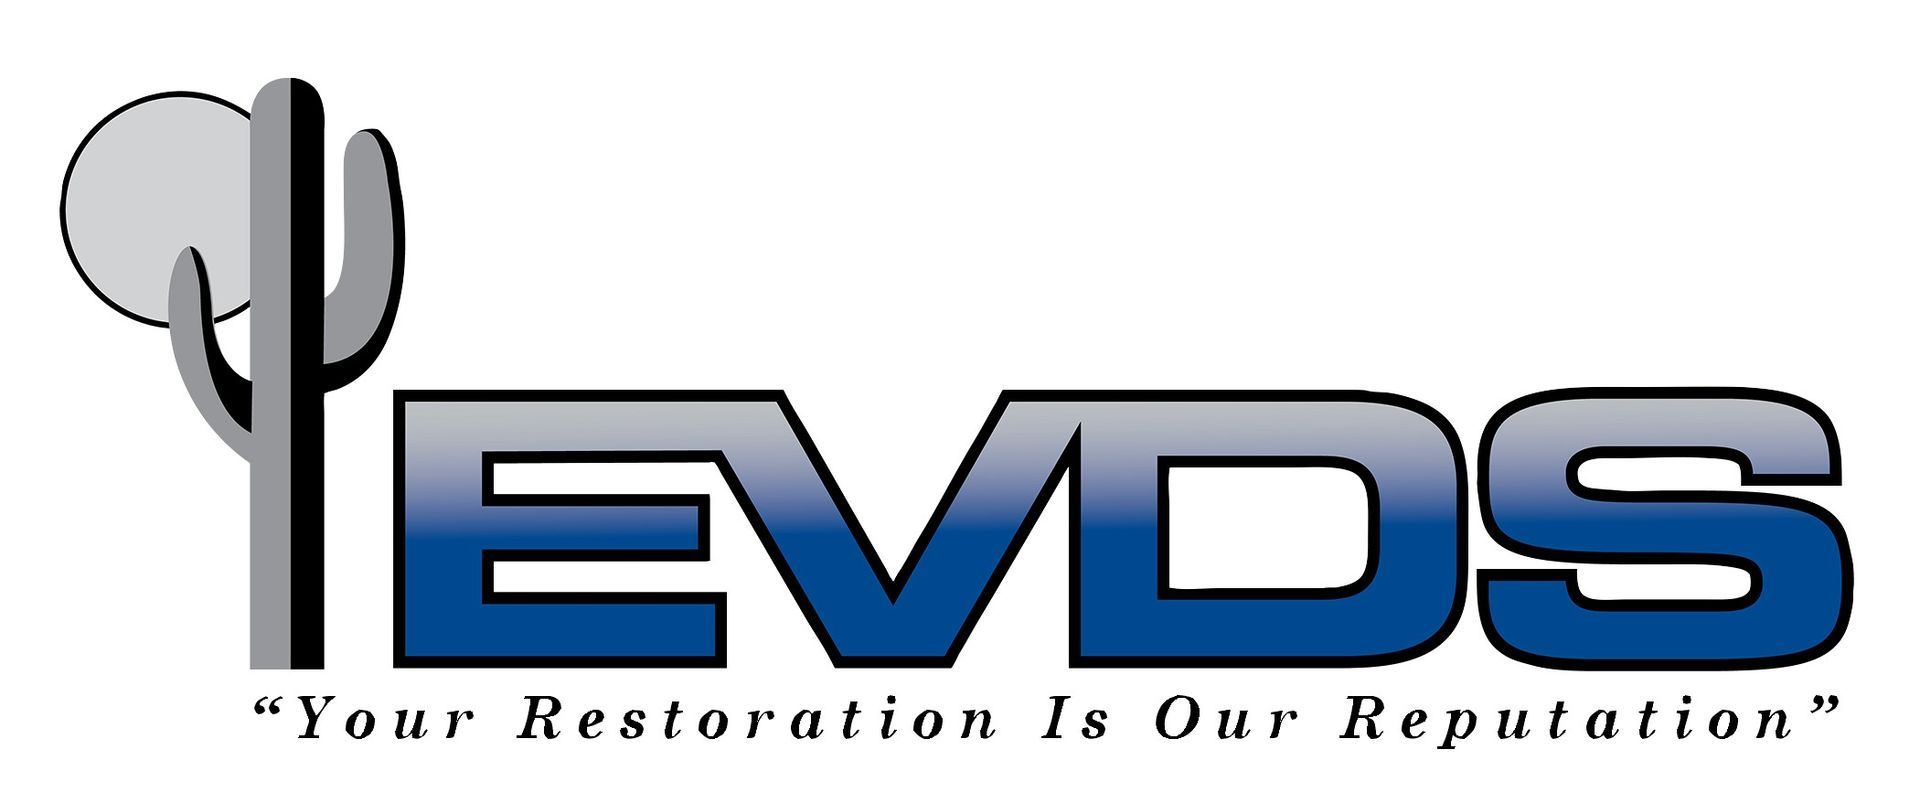 East Valley Disaster Service - logo